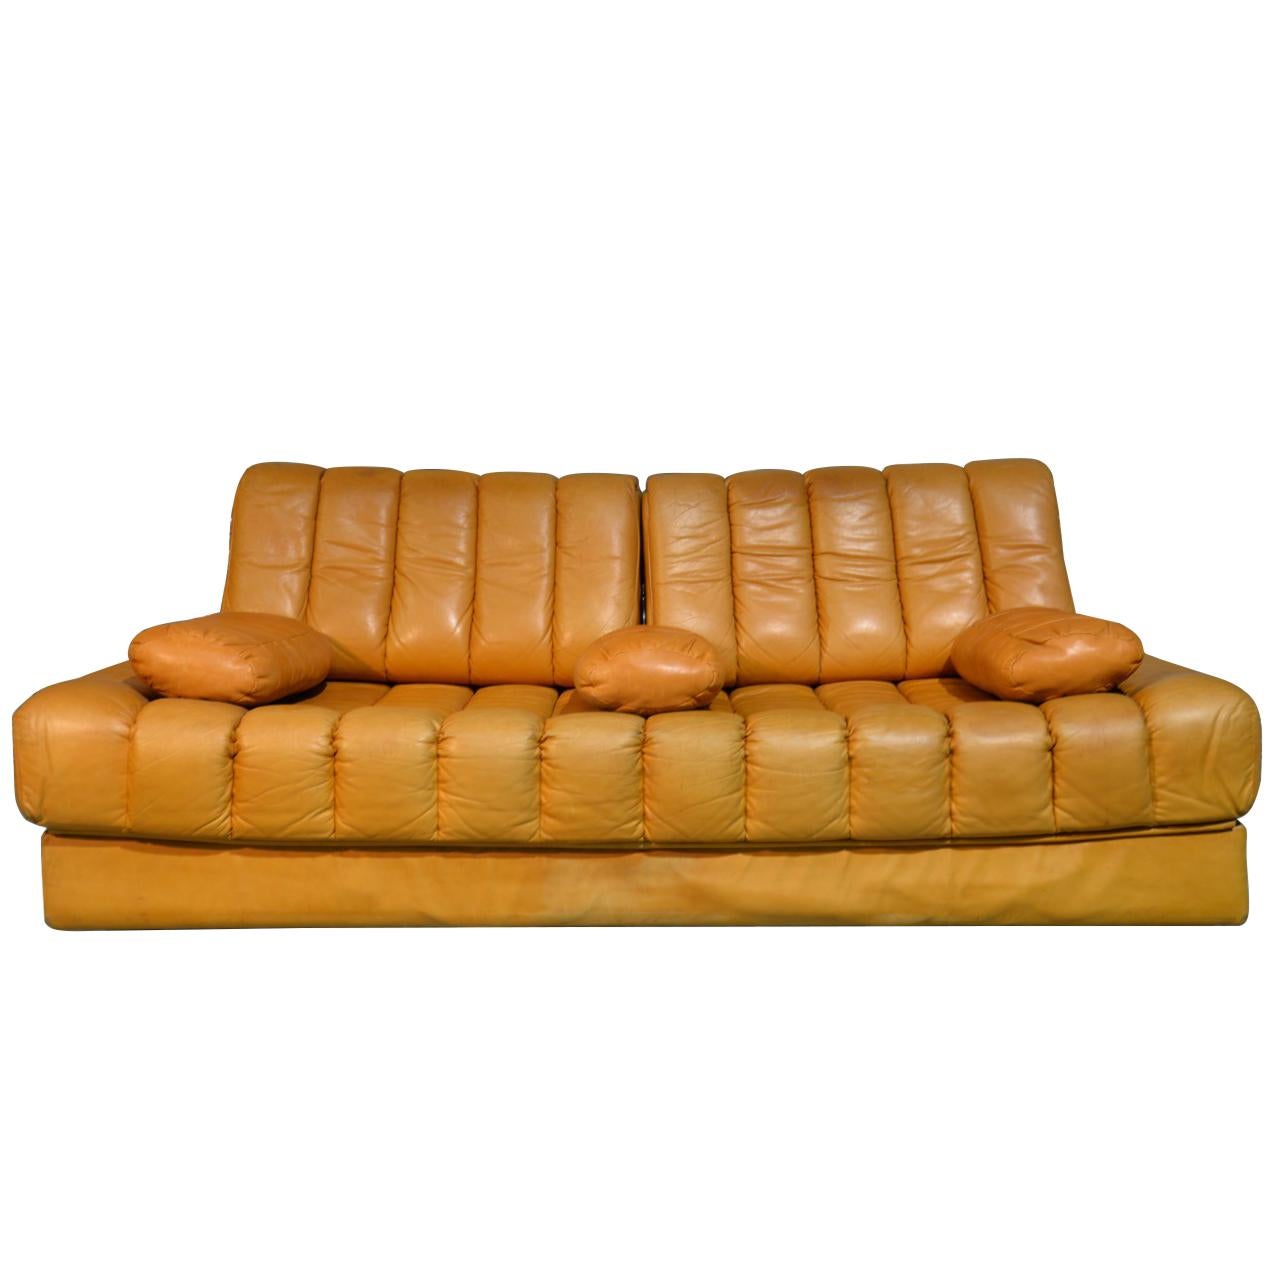 Vintage De Sede DS 85 Leather Daybed and Sofa / Loveseat, Switzerland 1960s For Sale